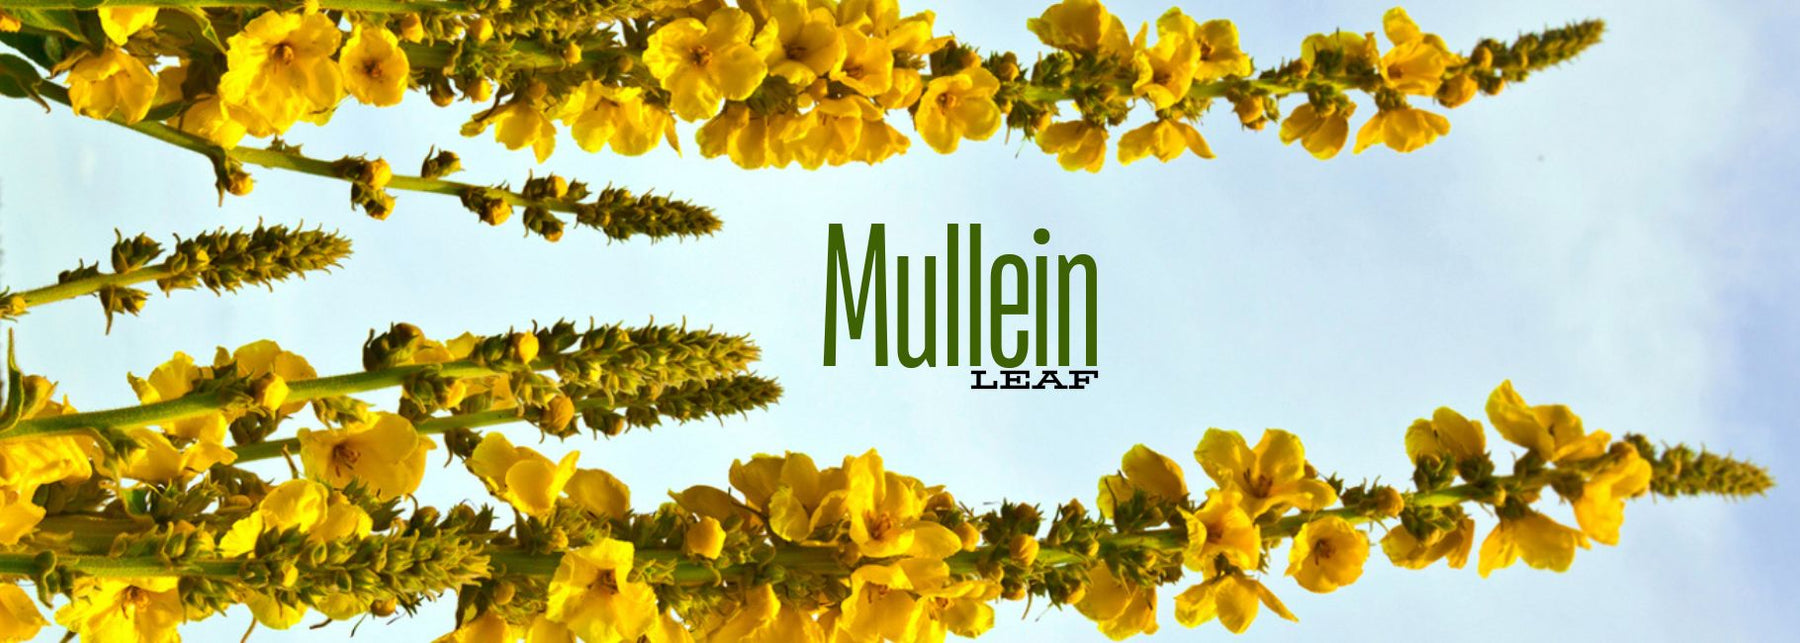 What is Mullein Leaf good for?